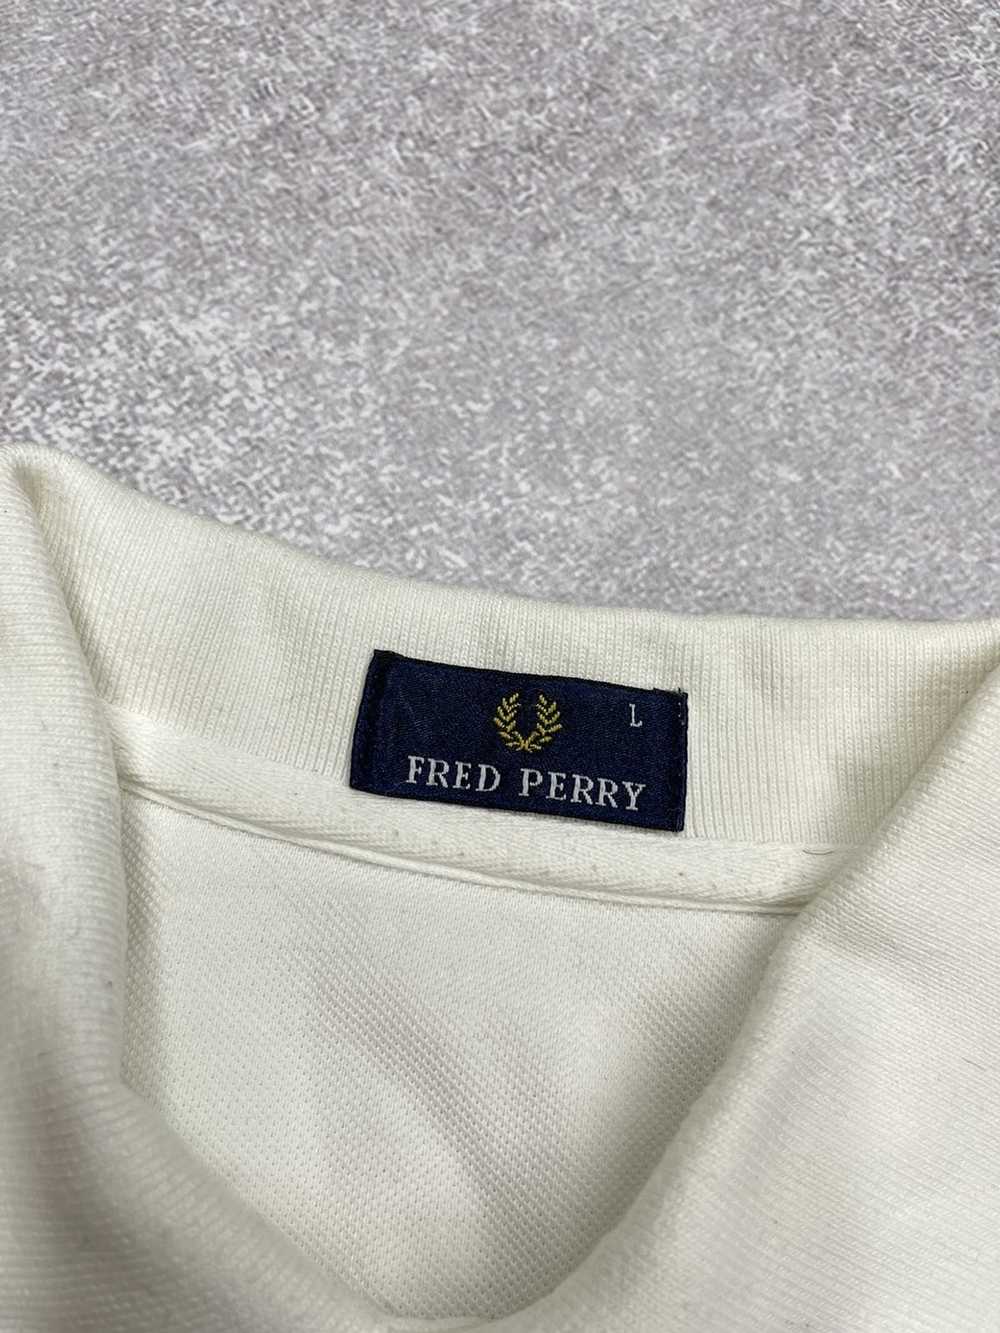 Fred Perry × Rare × Vintage Rare Vintage Fred Per… - image 8